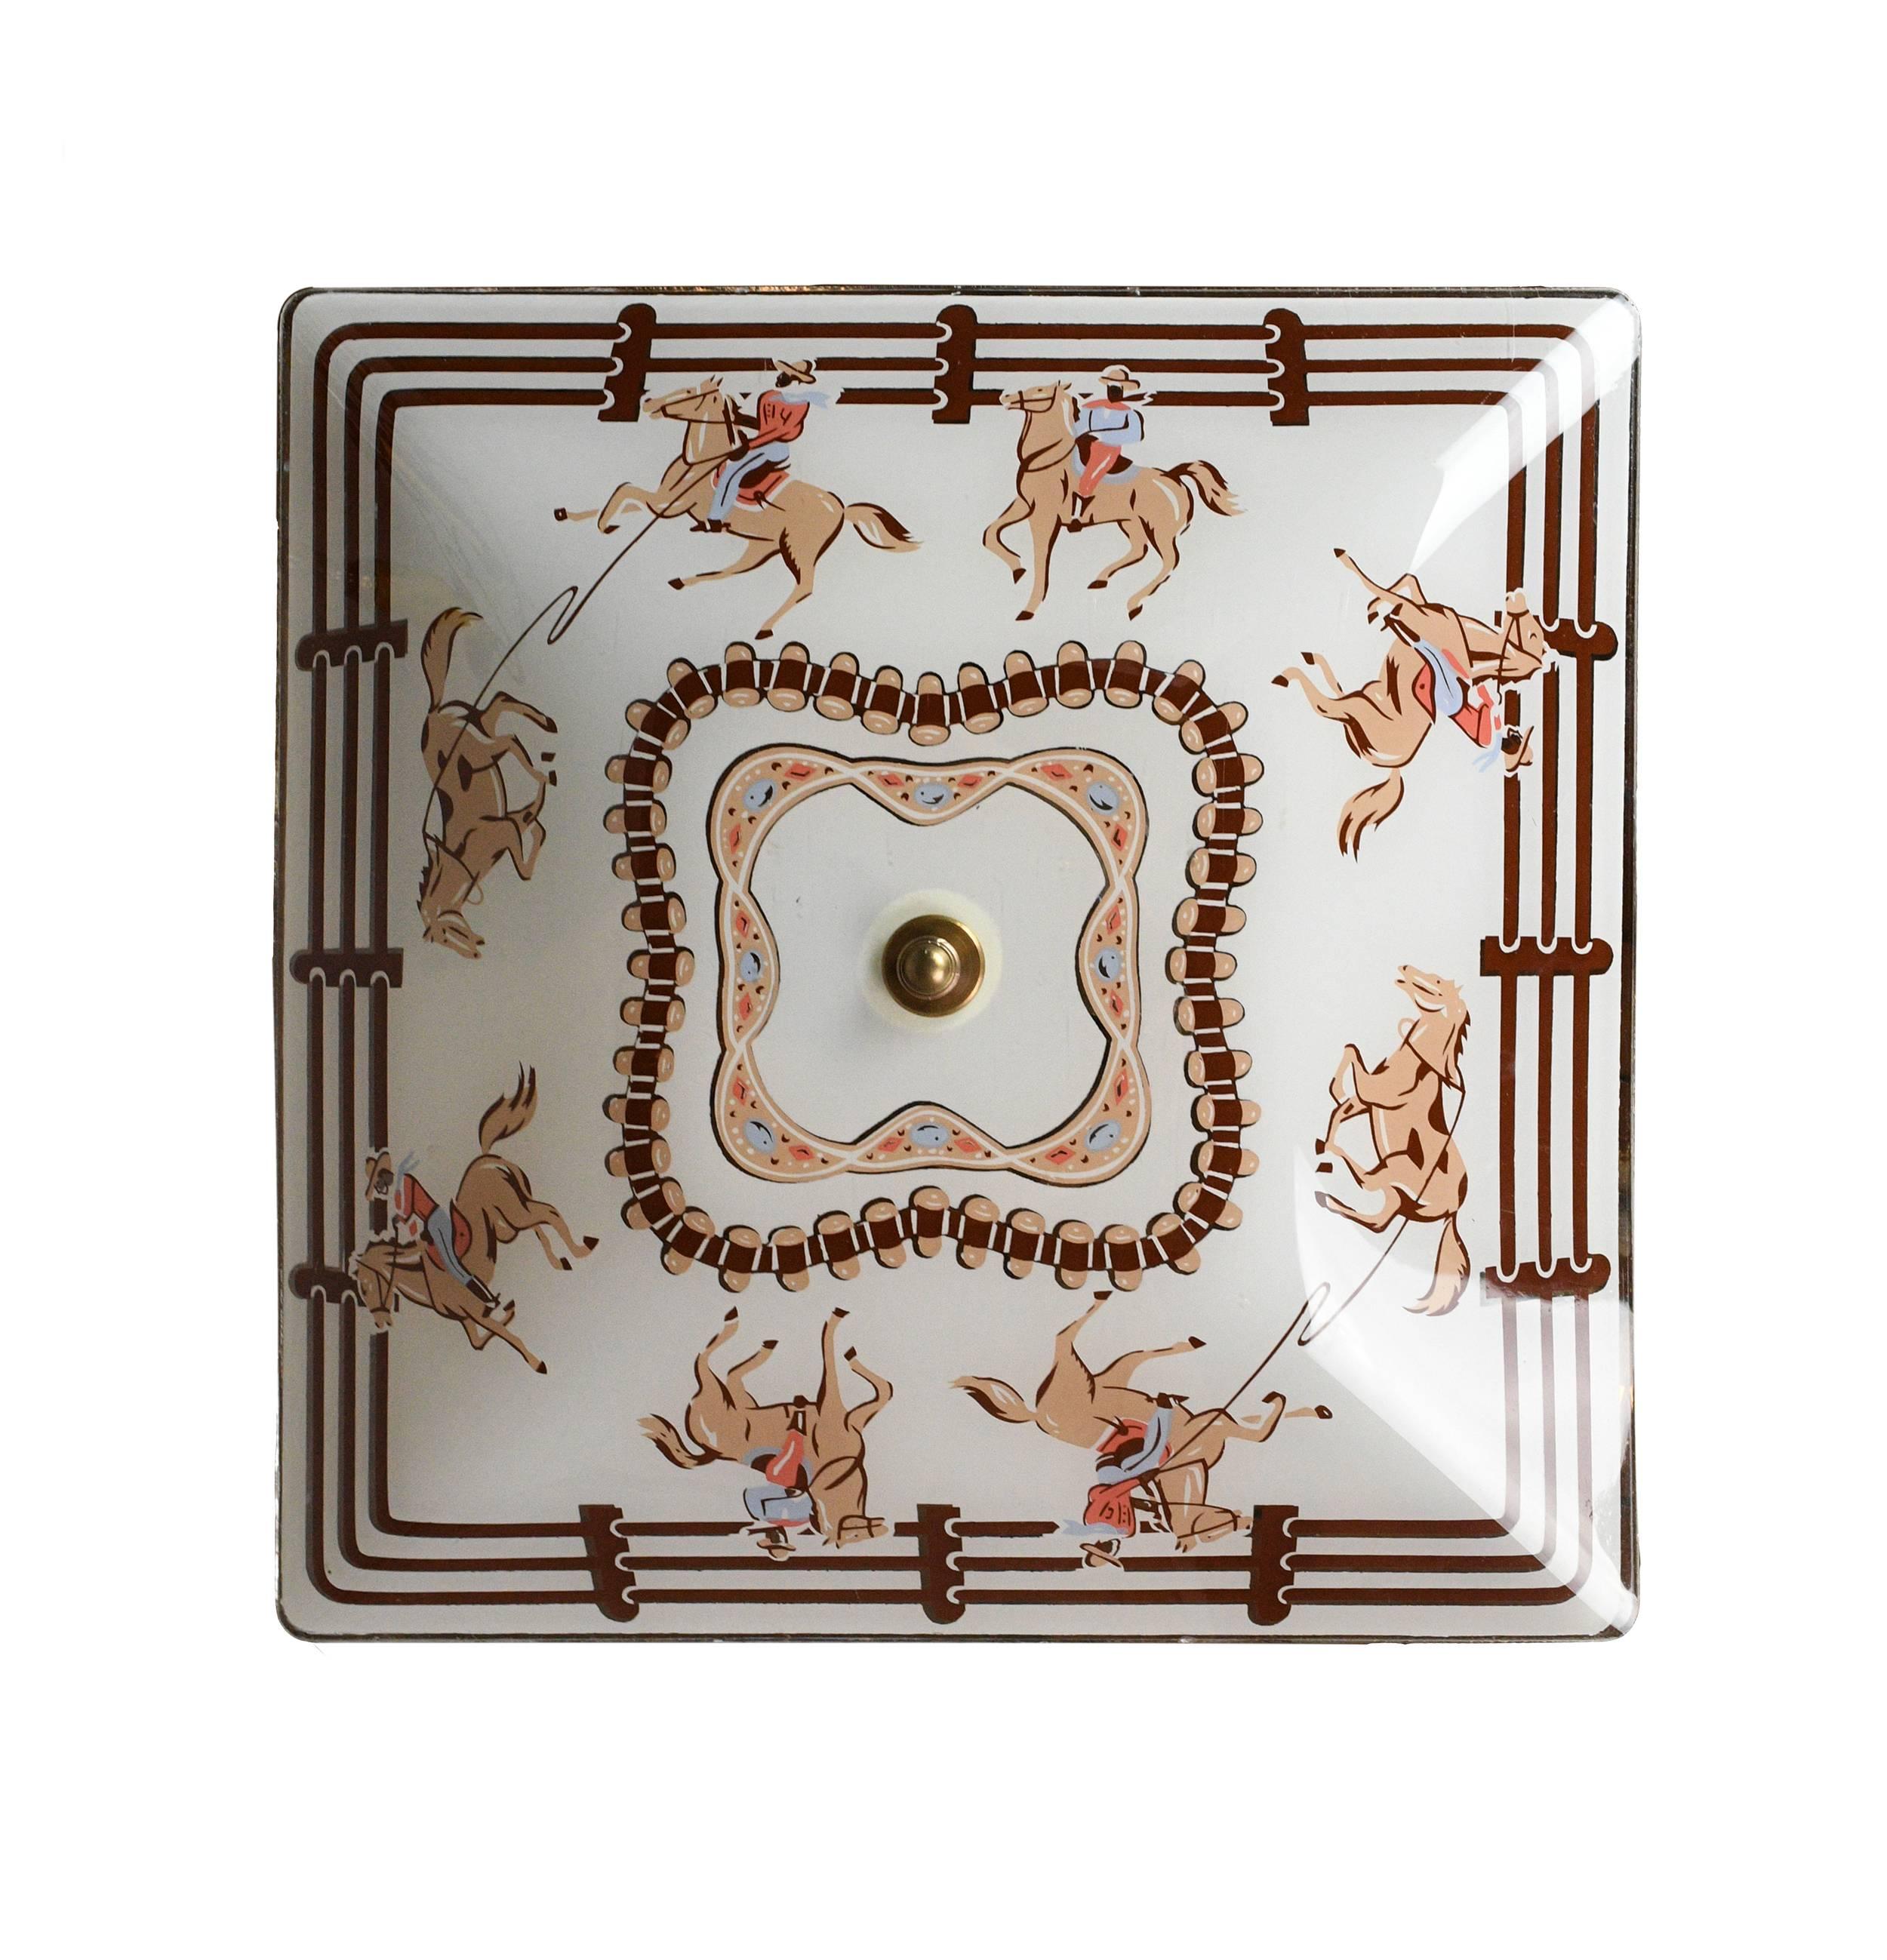 This low profile flush mount is very lovely. The square glass is painted with fences alongside western cowboy figures and horses. Behind the glass shade, there are two light bulbs, which will provide adequate lighting for your space. It’s not a